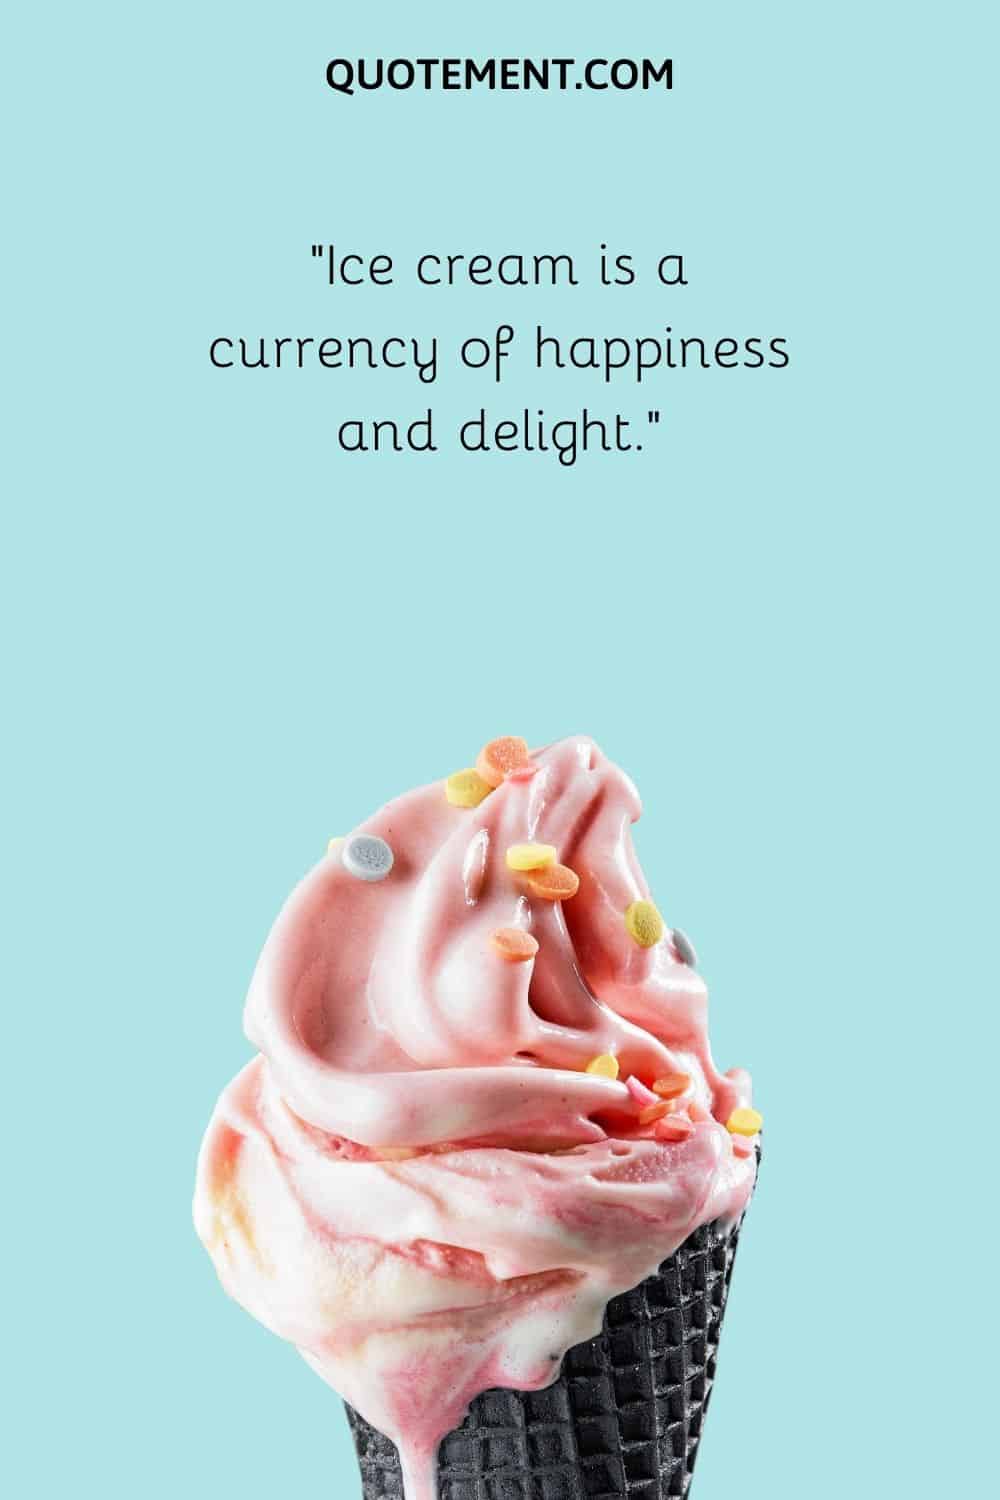 Ice cream is a currency of happiness and delight